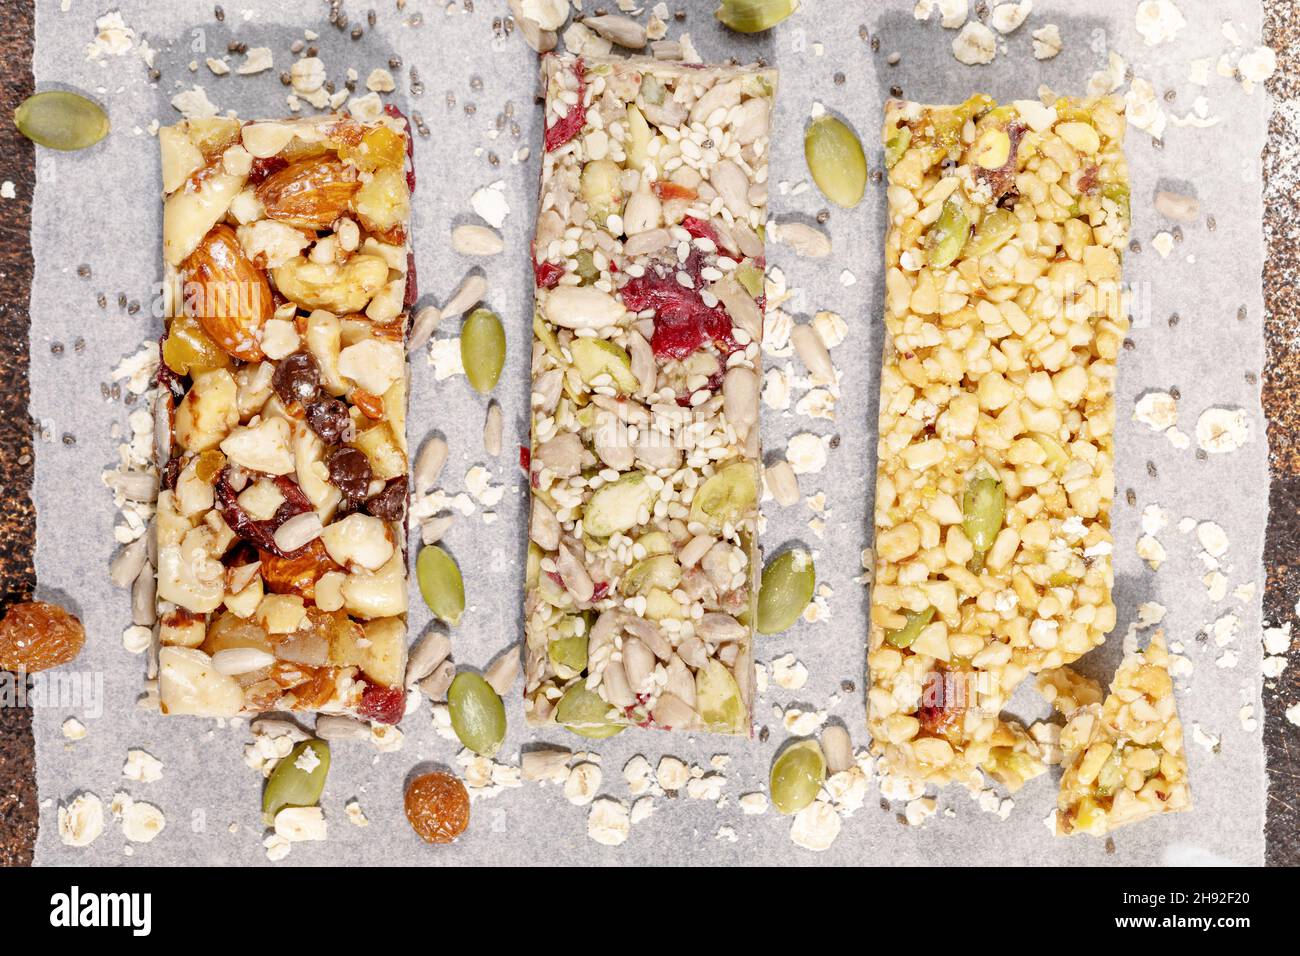 Different kind of granola cereal bars with nuts, seeds, oats, berries and dry fruits on a white pergament paper. Protein muesli bars. Granola superfoo Stock Photo